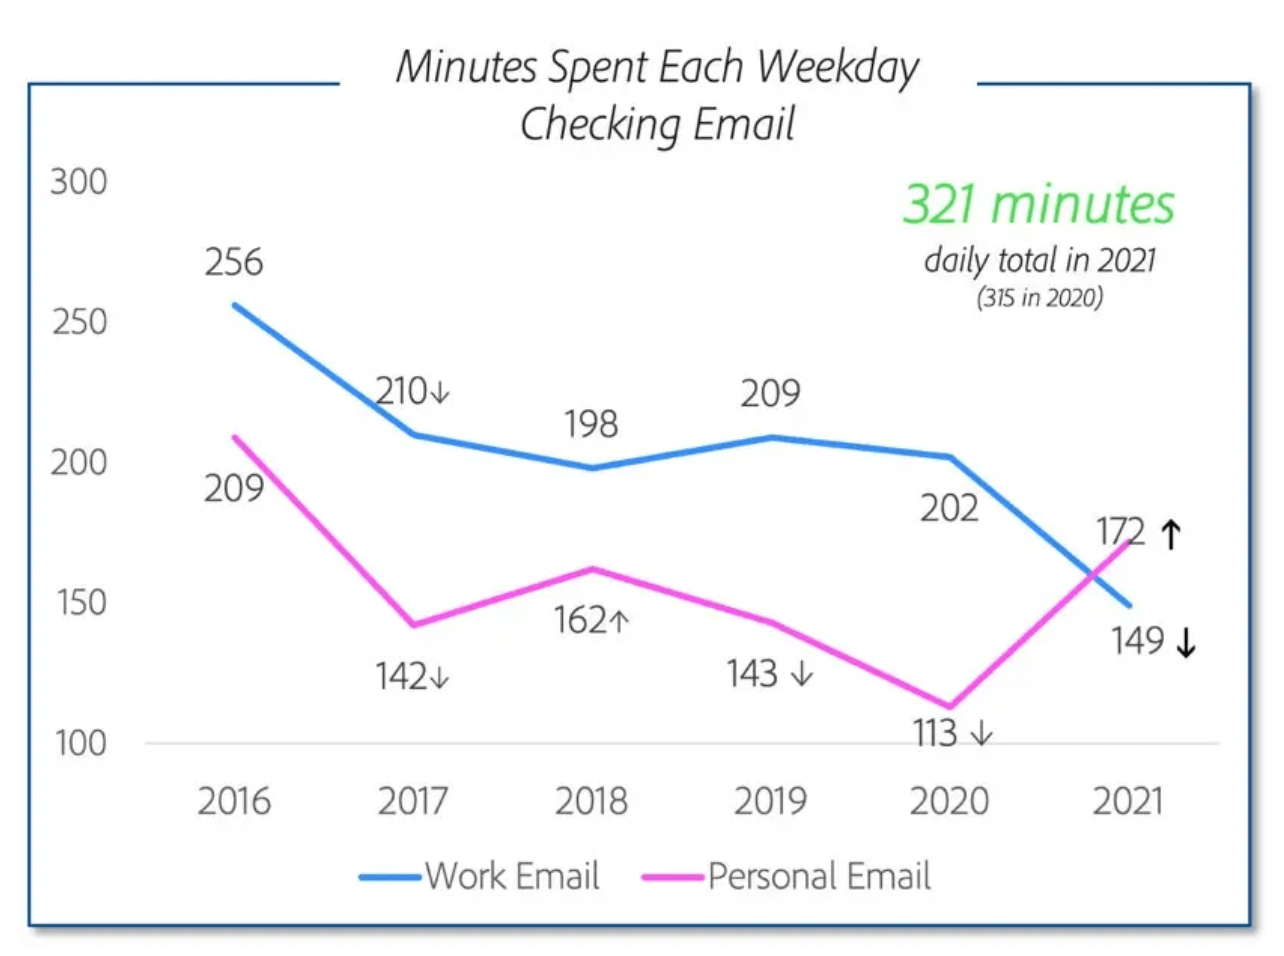 adobe survey explaining how often people check their work and personal emails